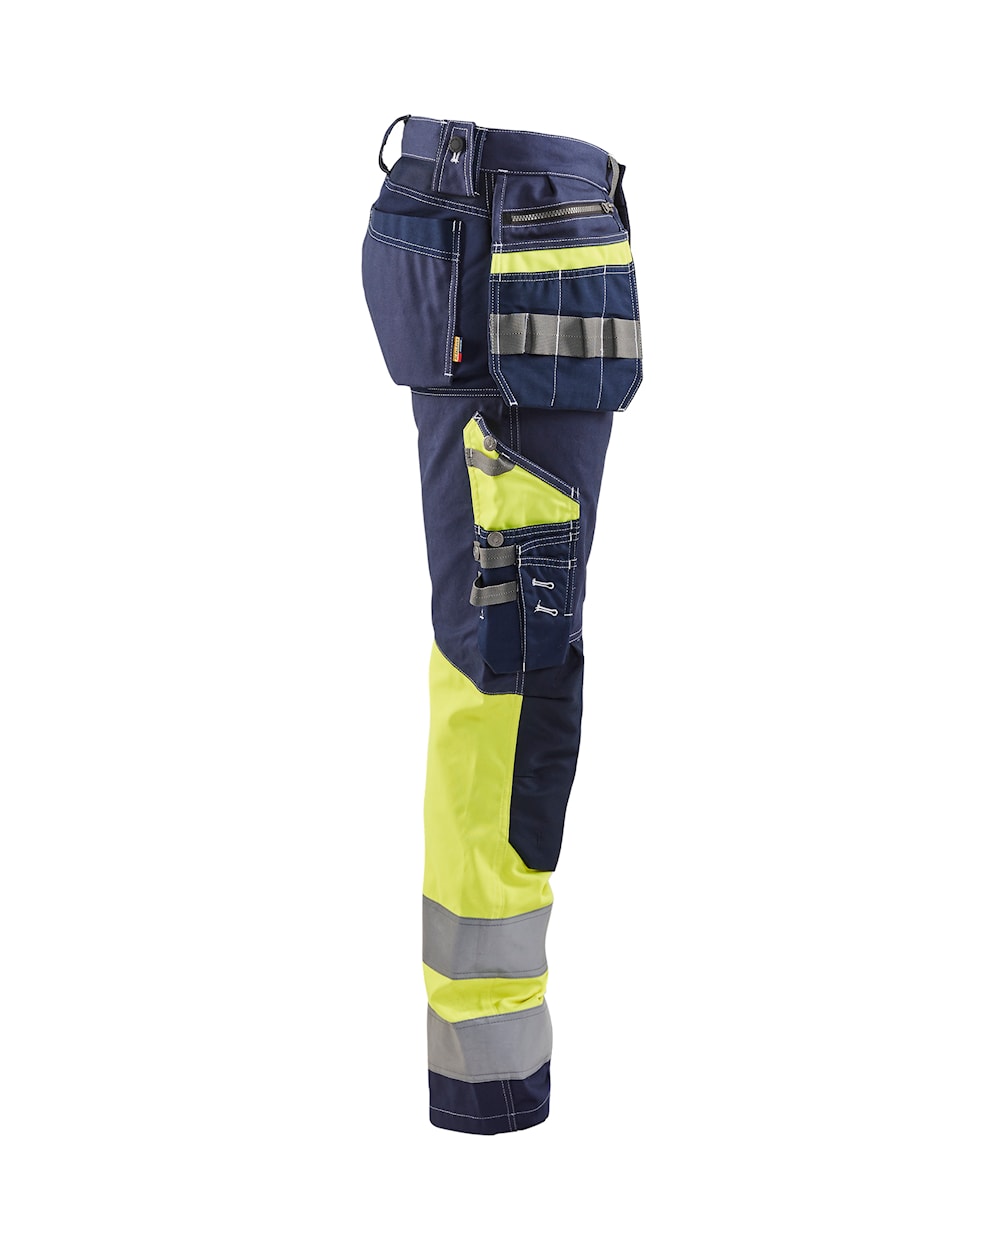 Blaklader Hi-Vis Trousers with Stretch 1794